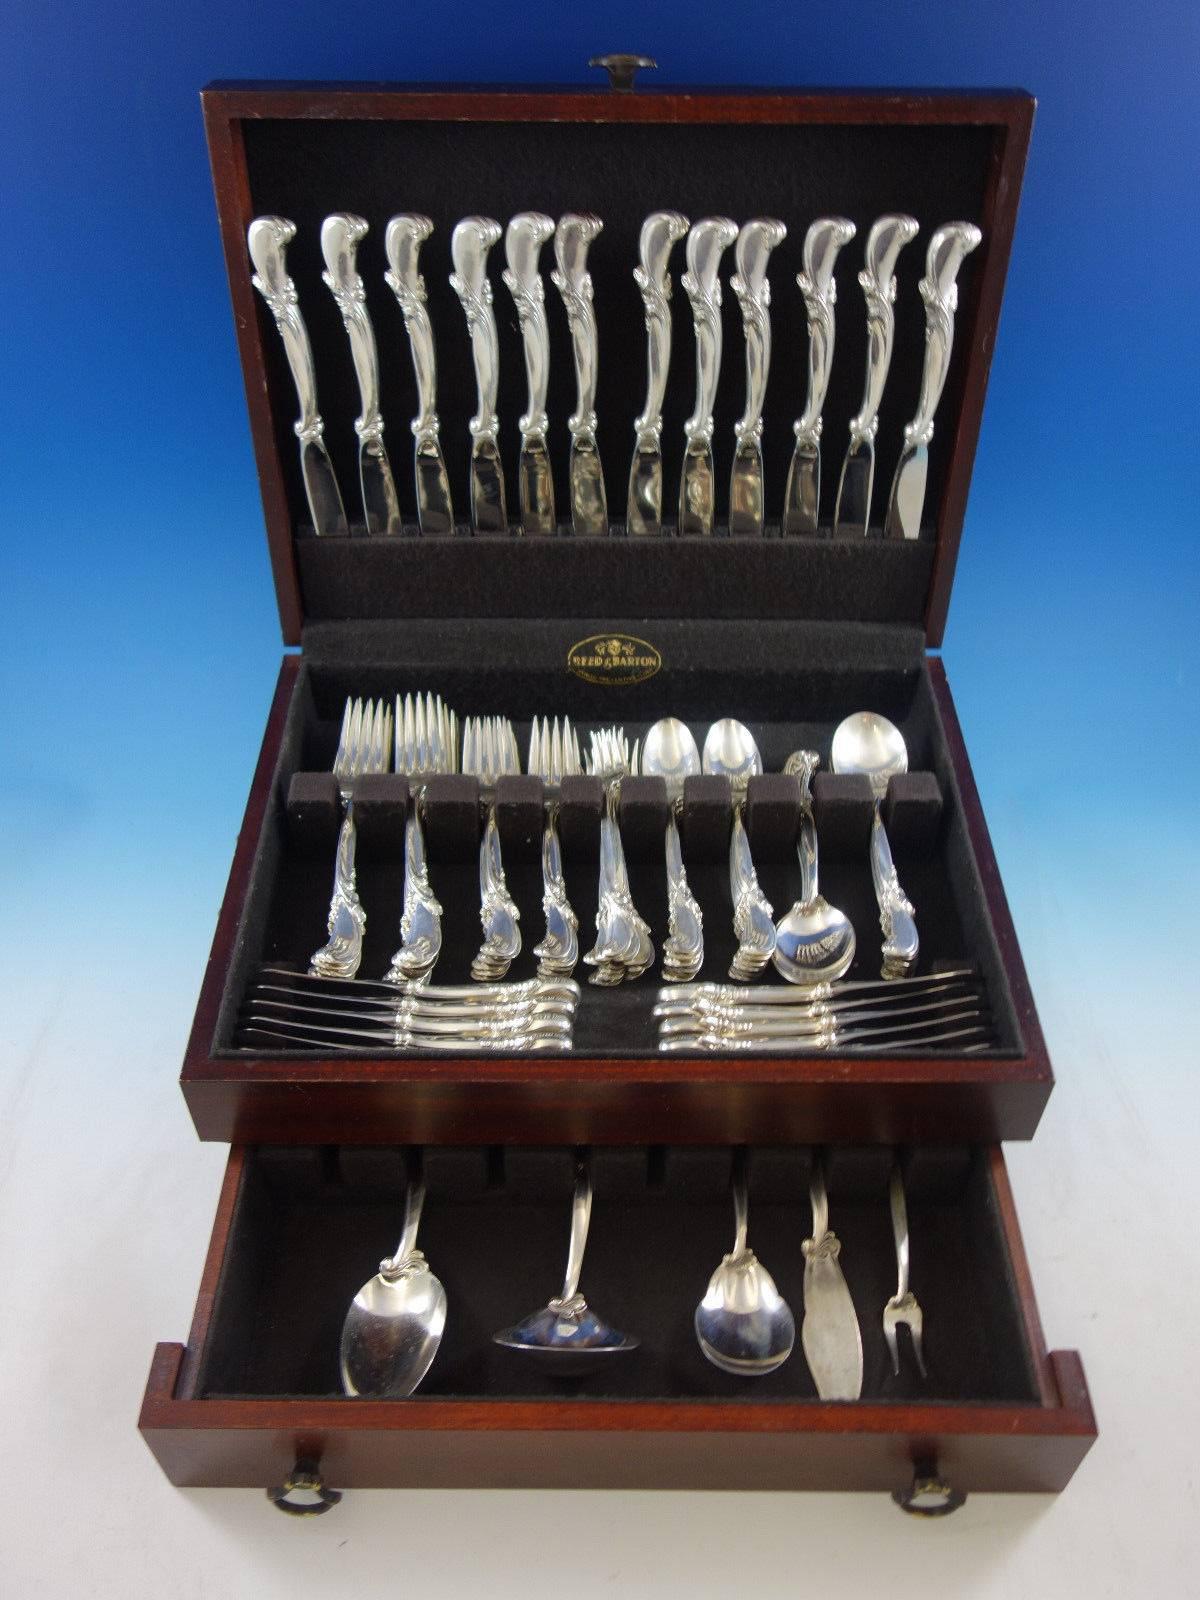 Waltz of Spring by Wallace sterling silver flatware set, 89 pieces. This set includes: 

12 knives, 8 7/8